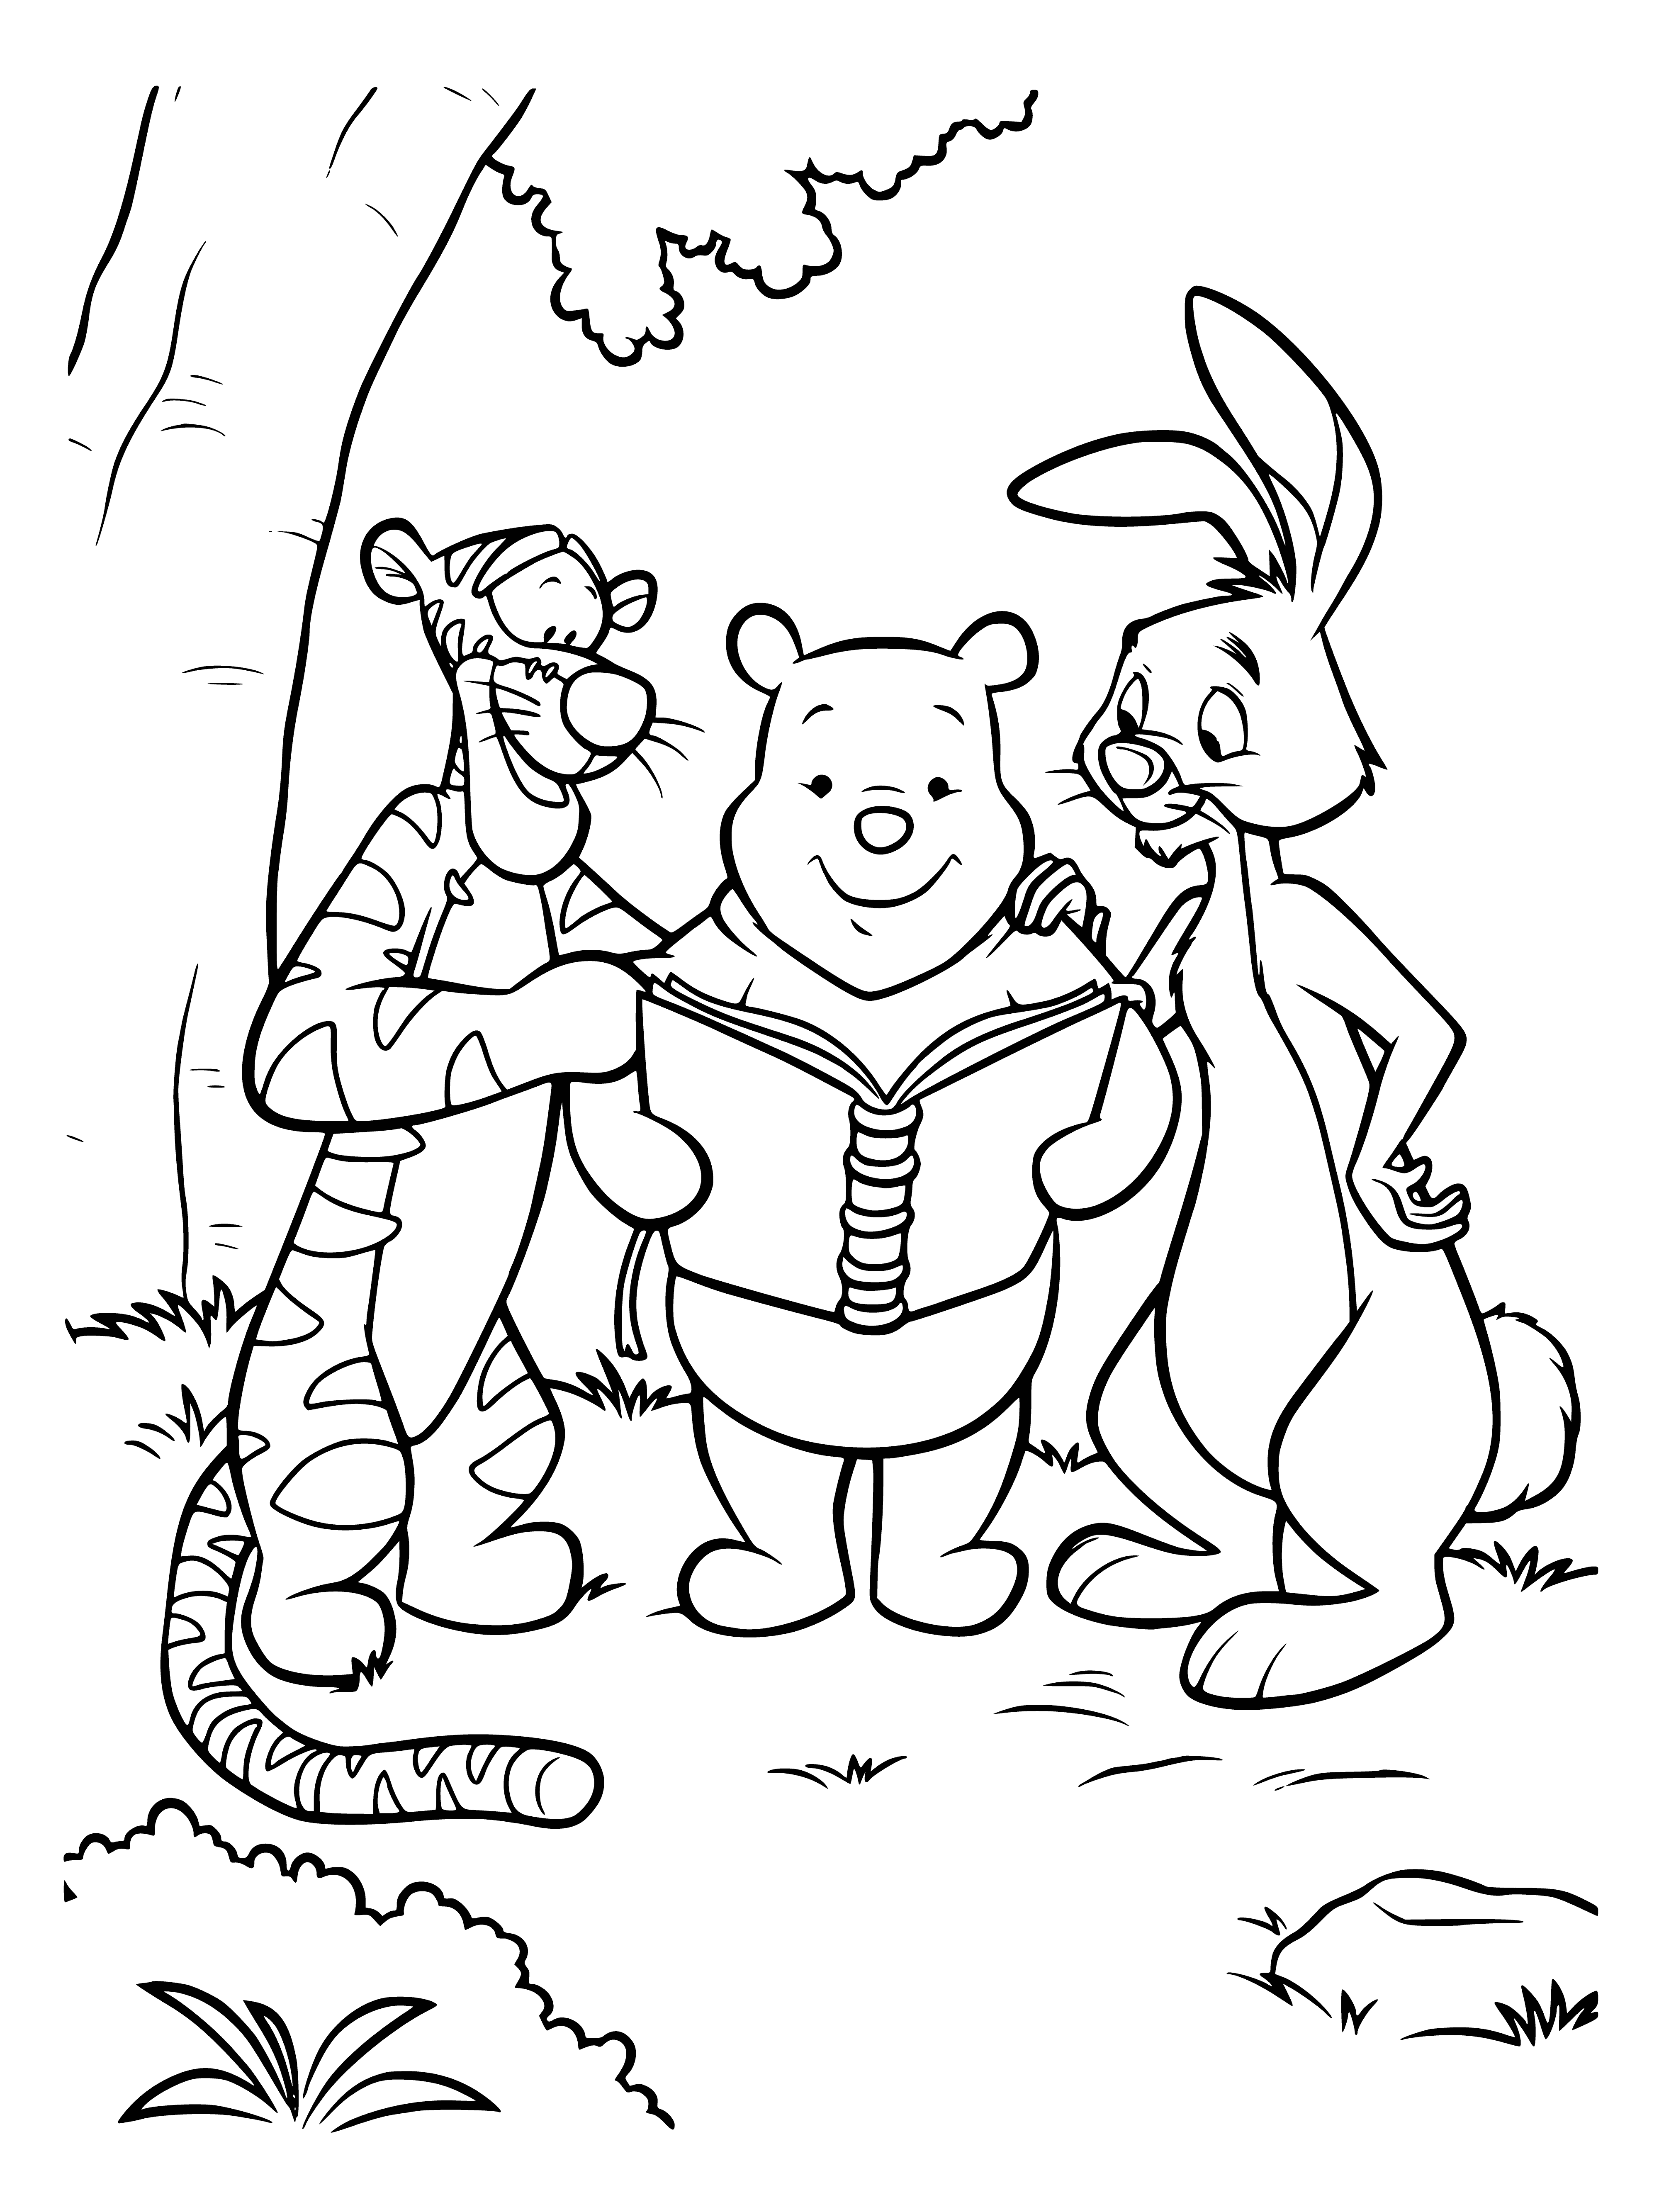 coloring page: Teddy bear sits on a stool, book open, paw raised as if to turn the page, adorned with red ribbons on his head and body.